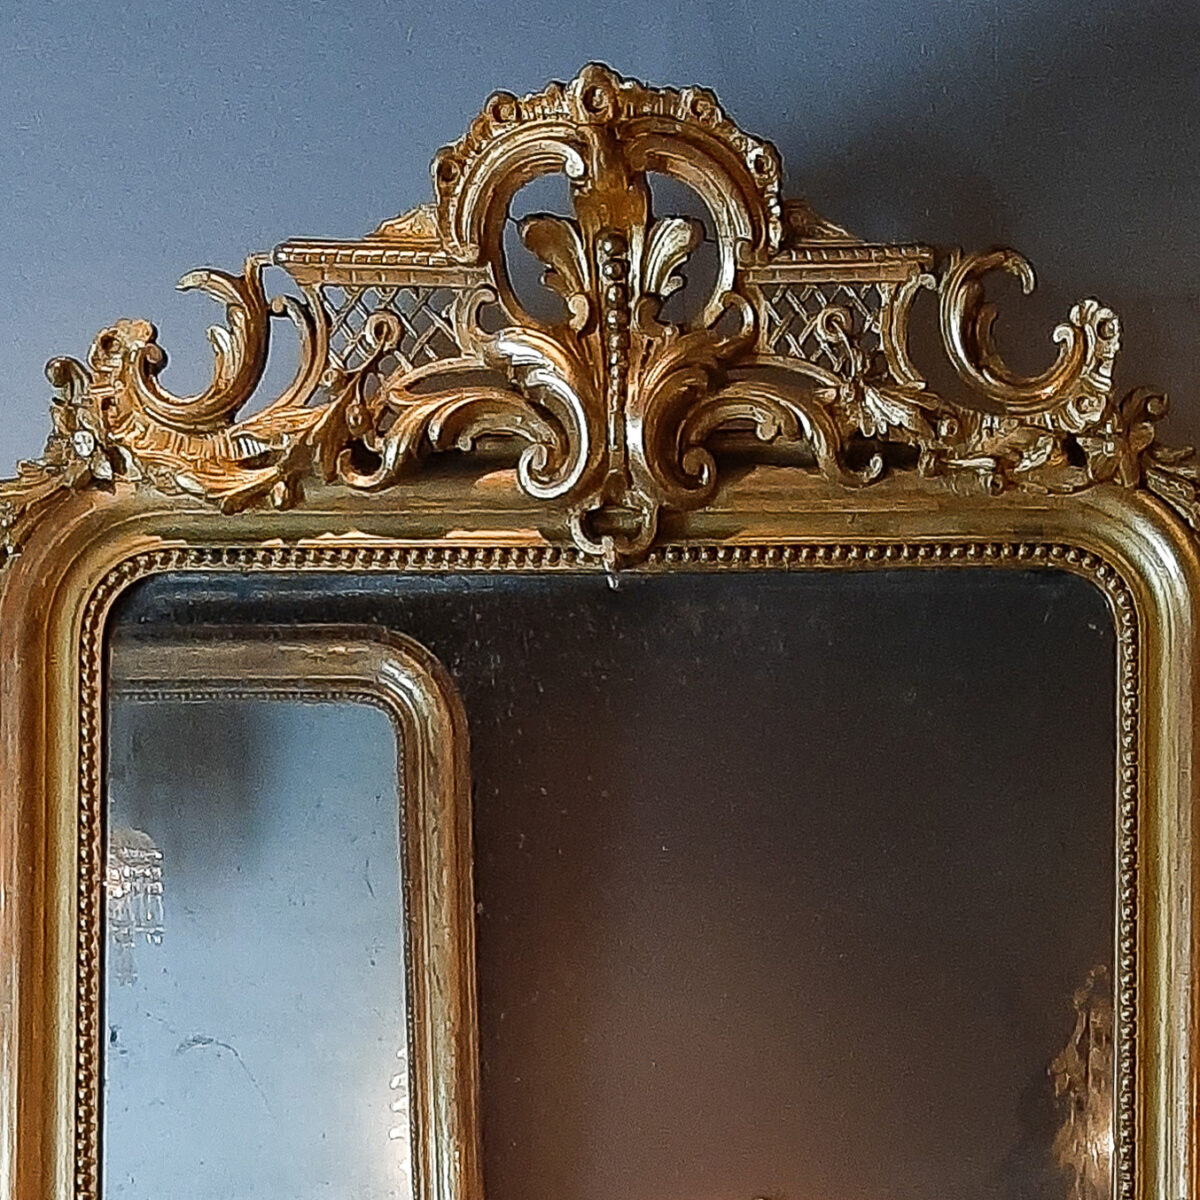 Mirror in lacquer and straw marquetry, Louis XIV period. - Ref.100911